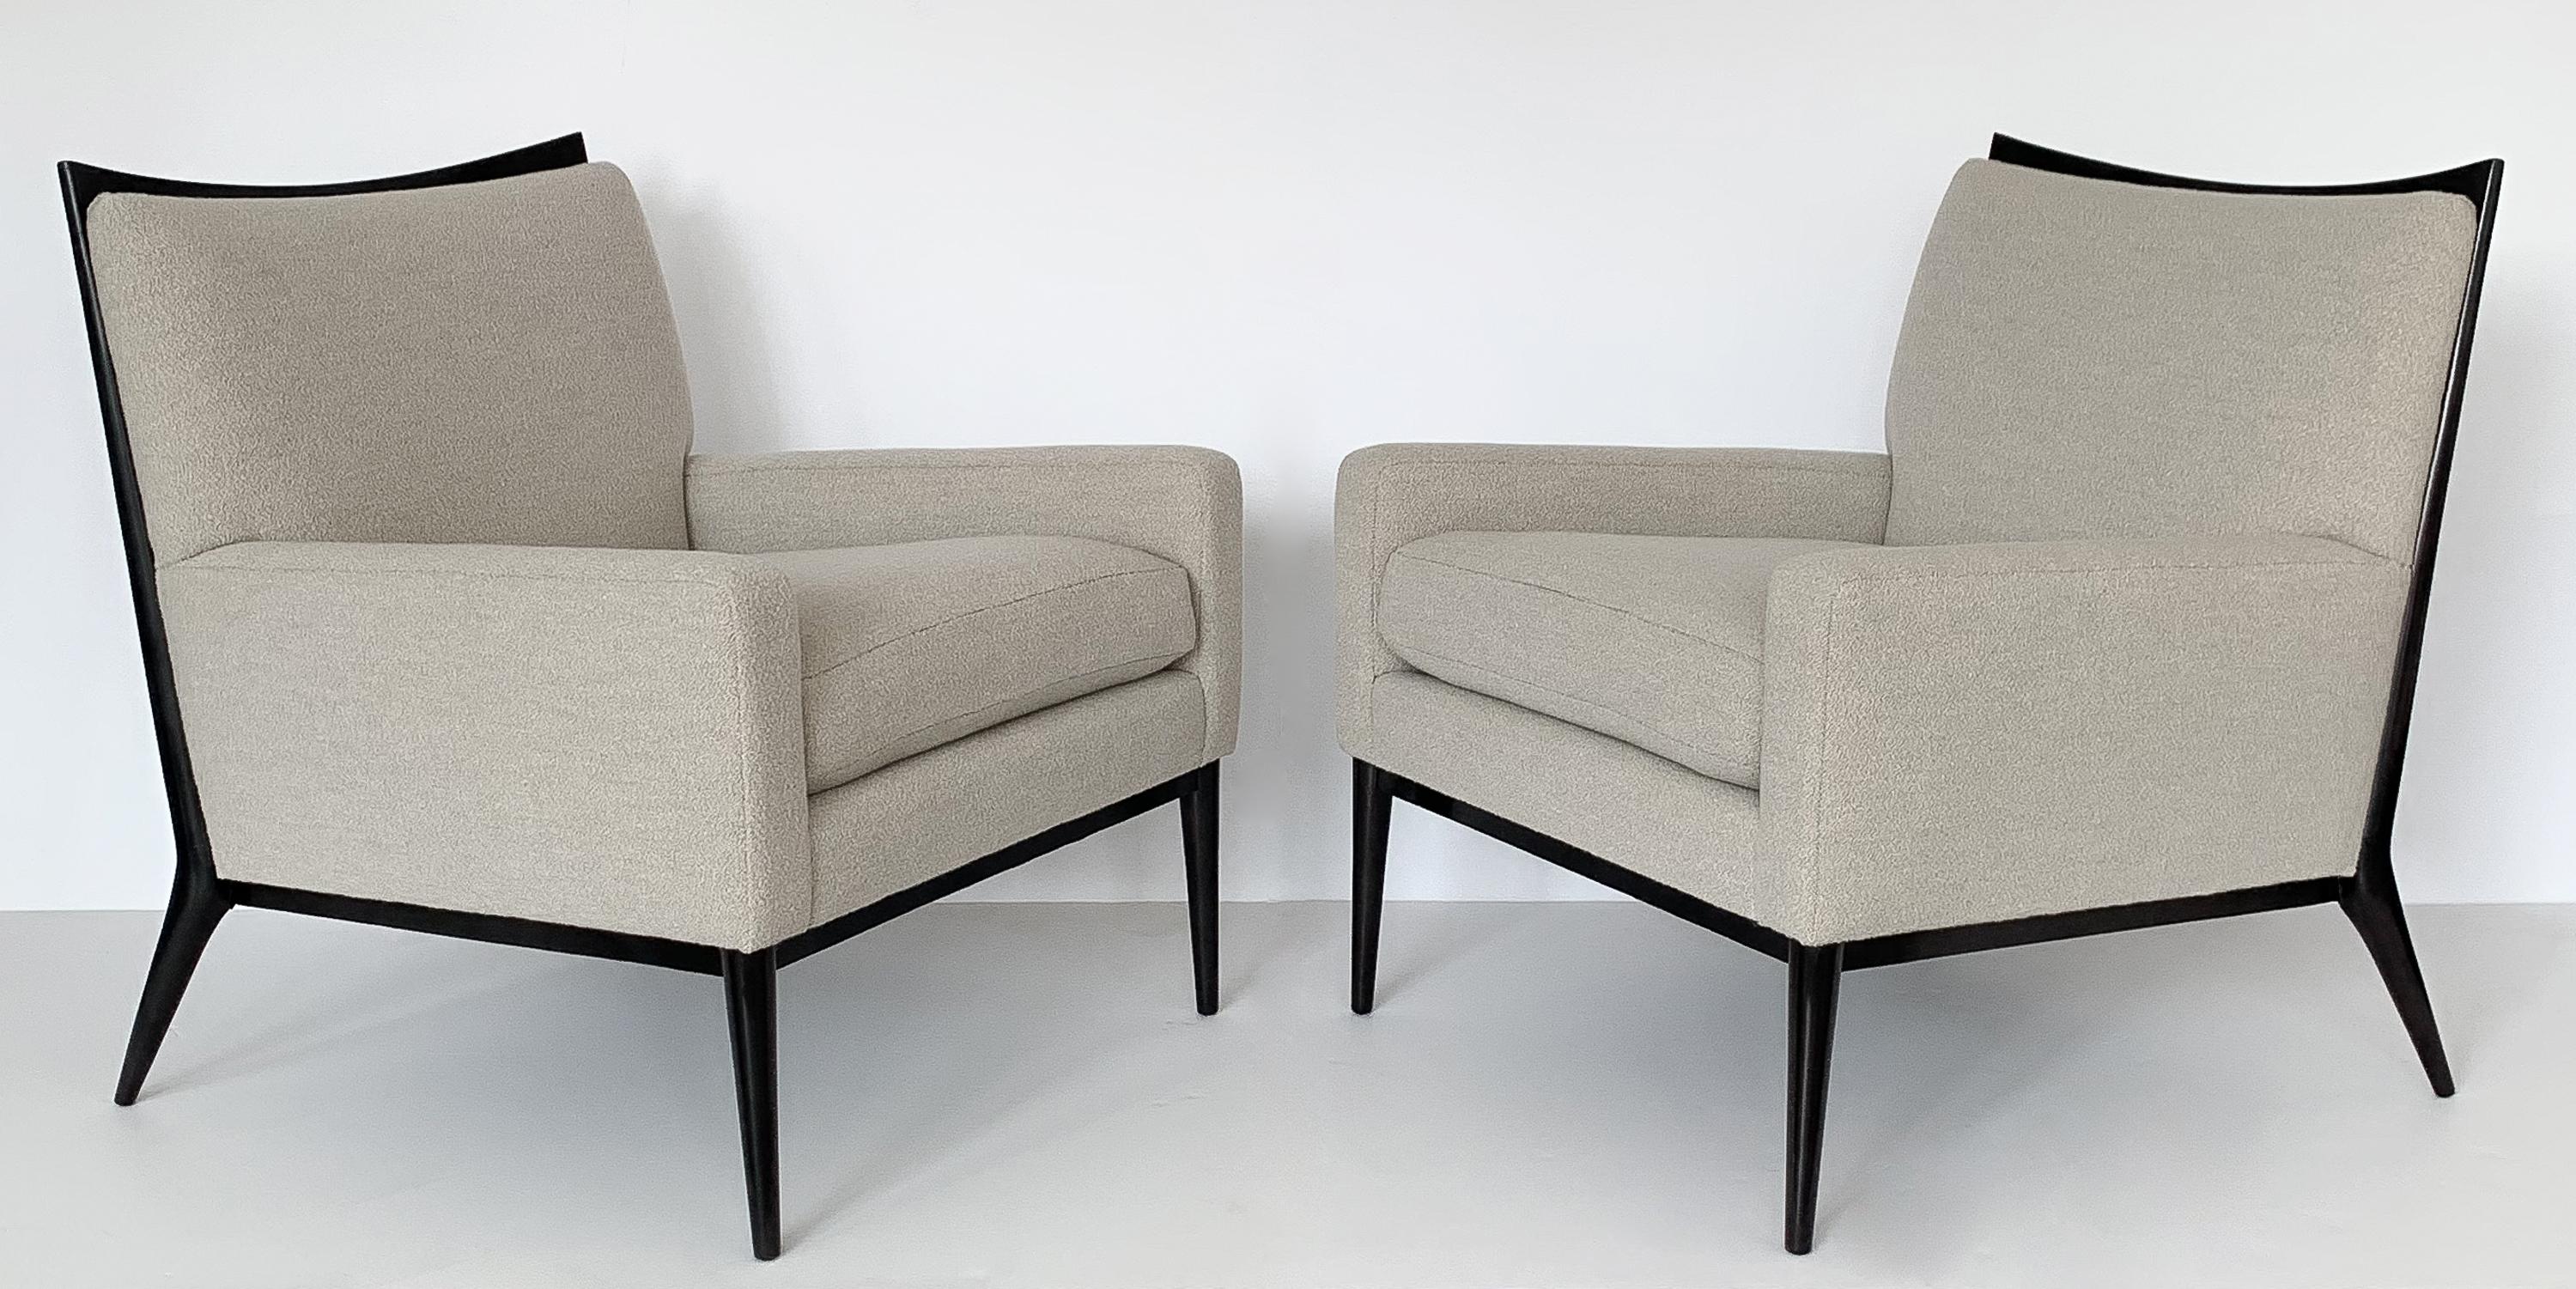 American Pair of Paul McCobb Lounge Chairs for Directional